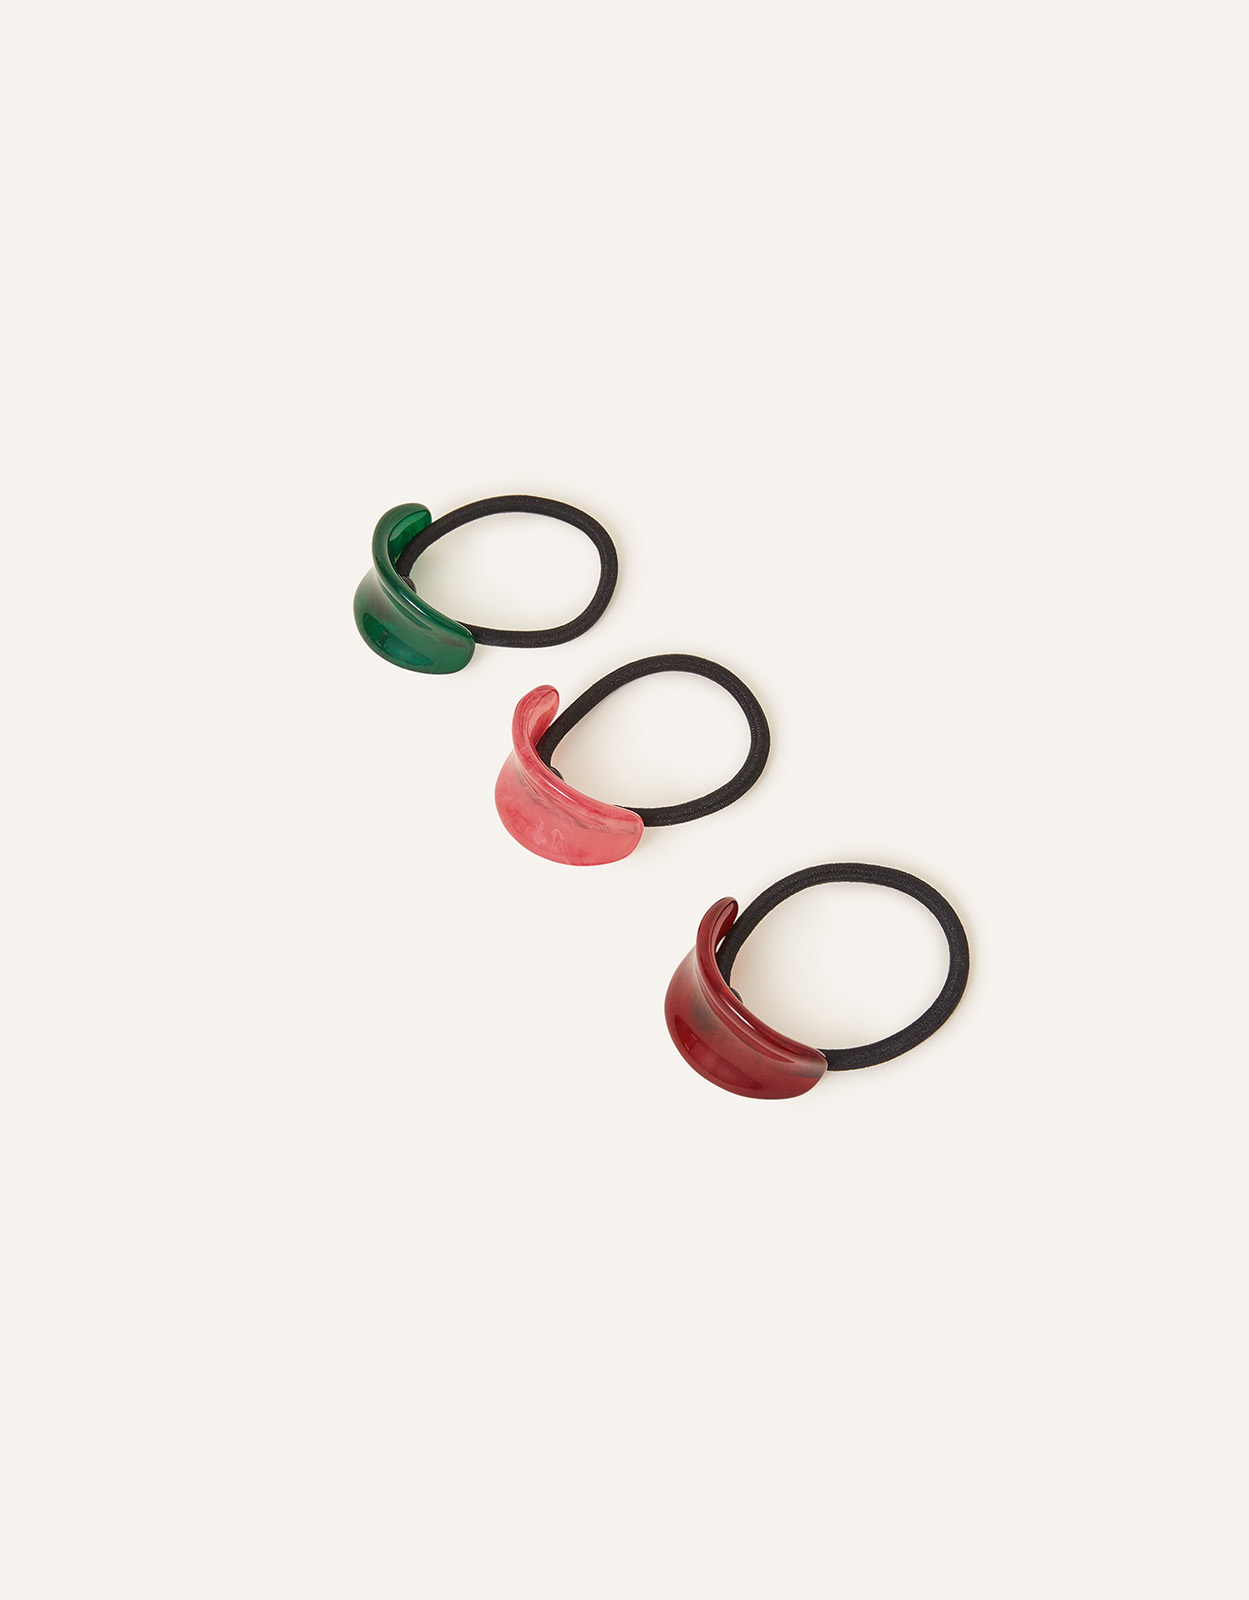 Accessorize Women's Resin Hairbands Set of Three